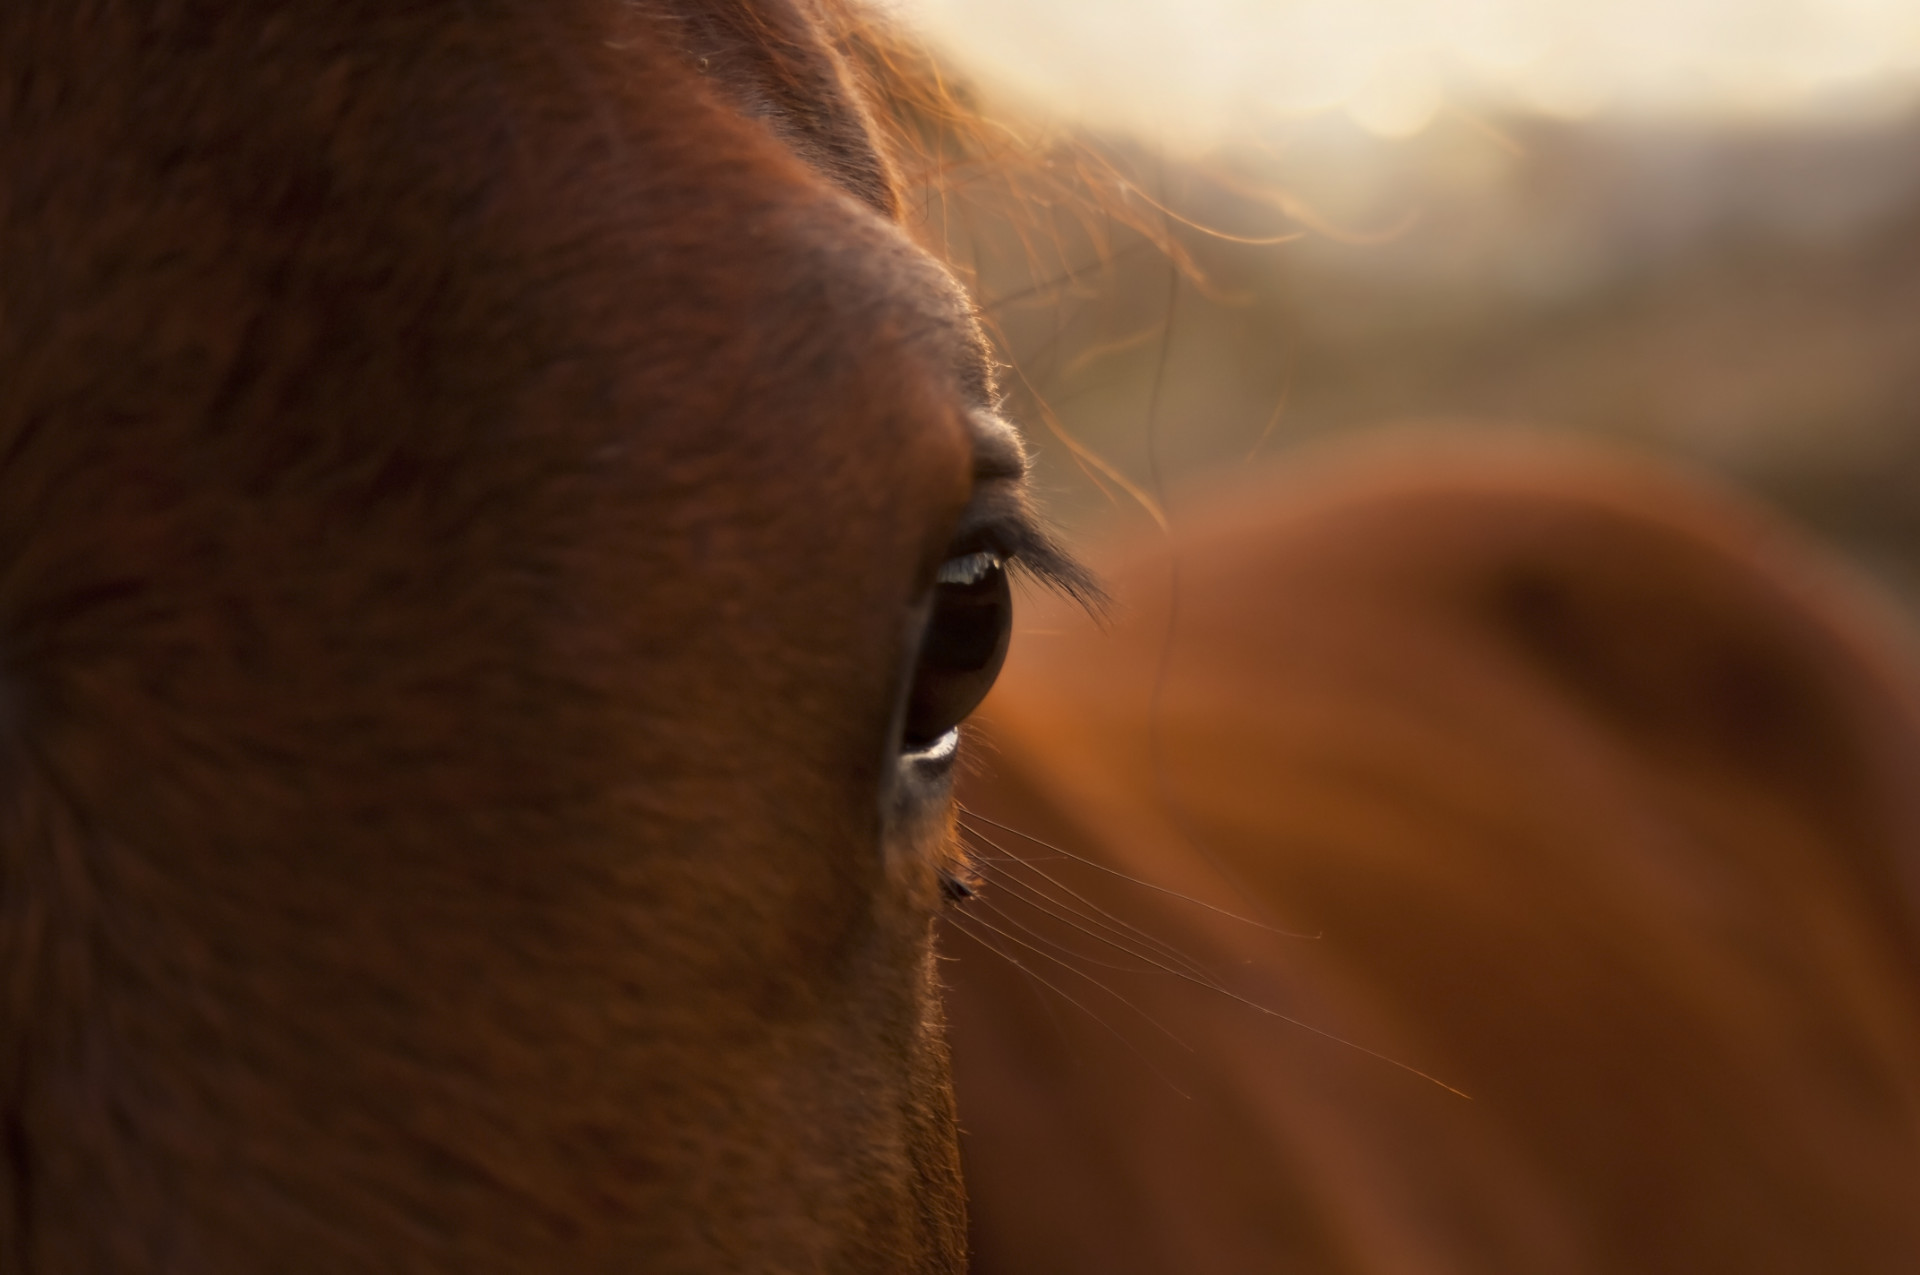 Beautiful close up of a horses eye in golden sunlight